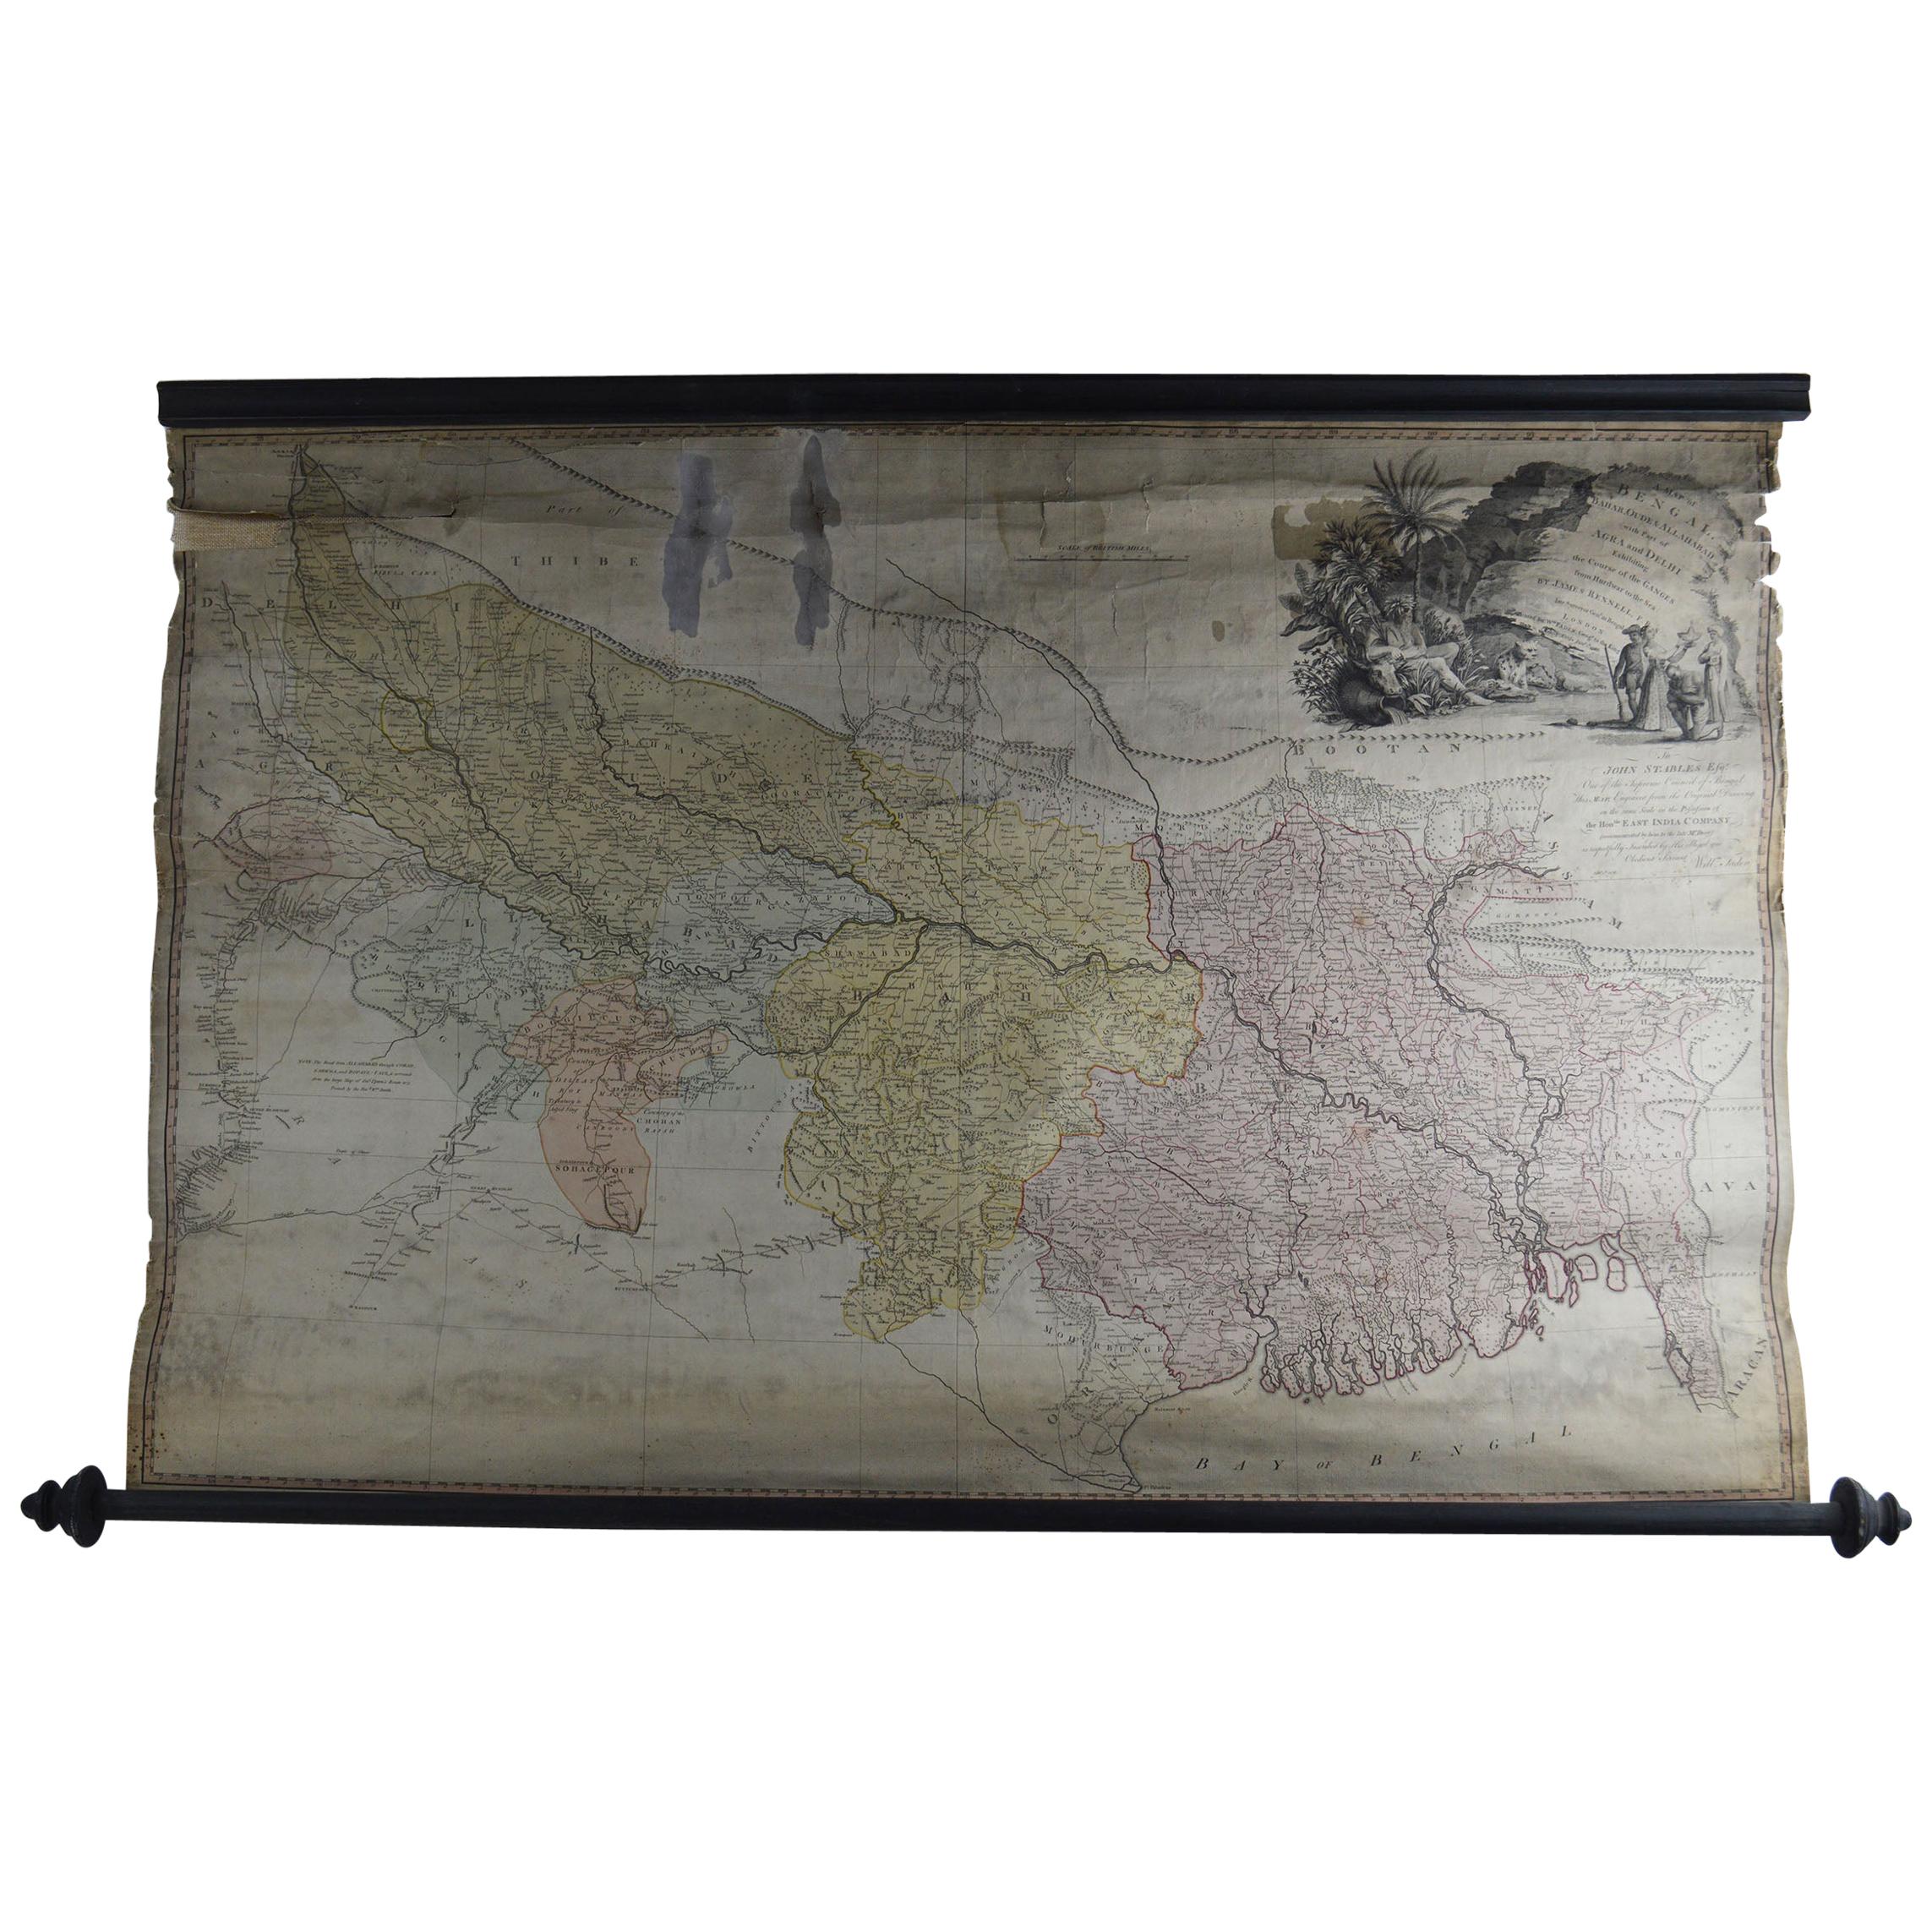 Antique Scroll Map of India by James Rennell, Dated 1786